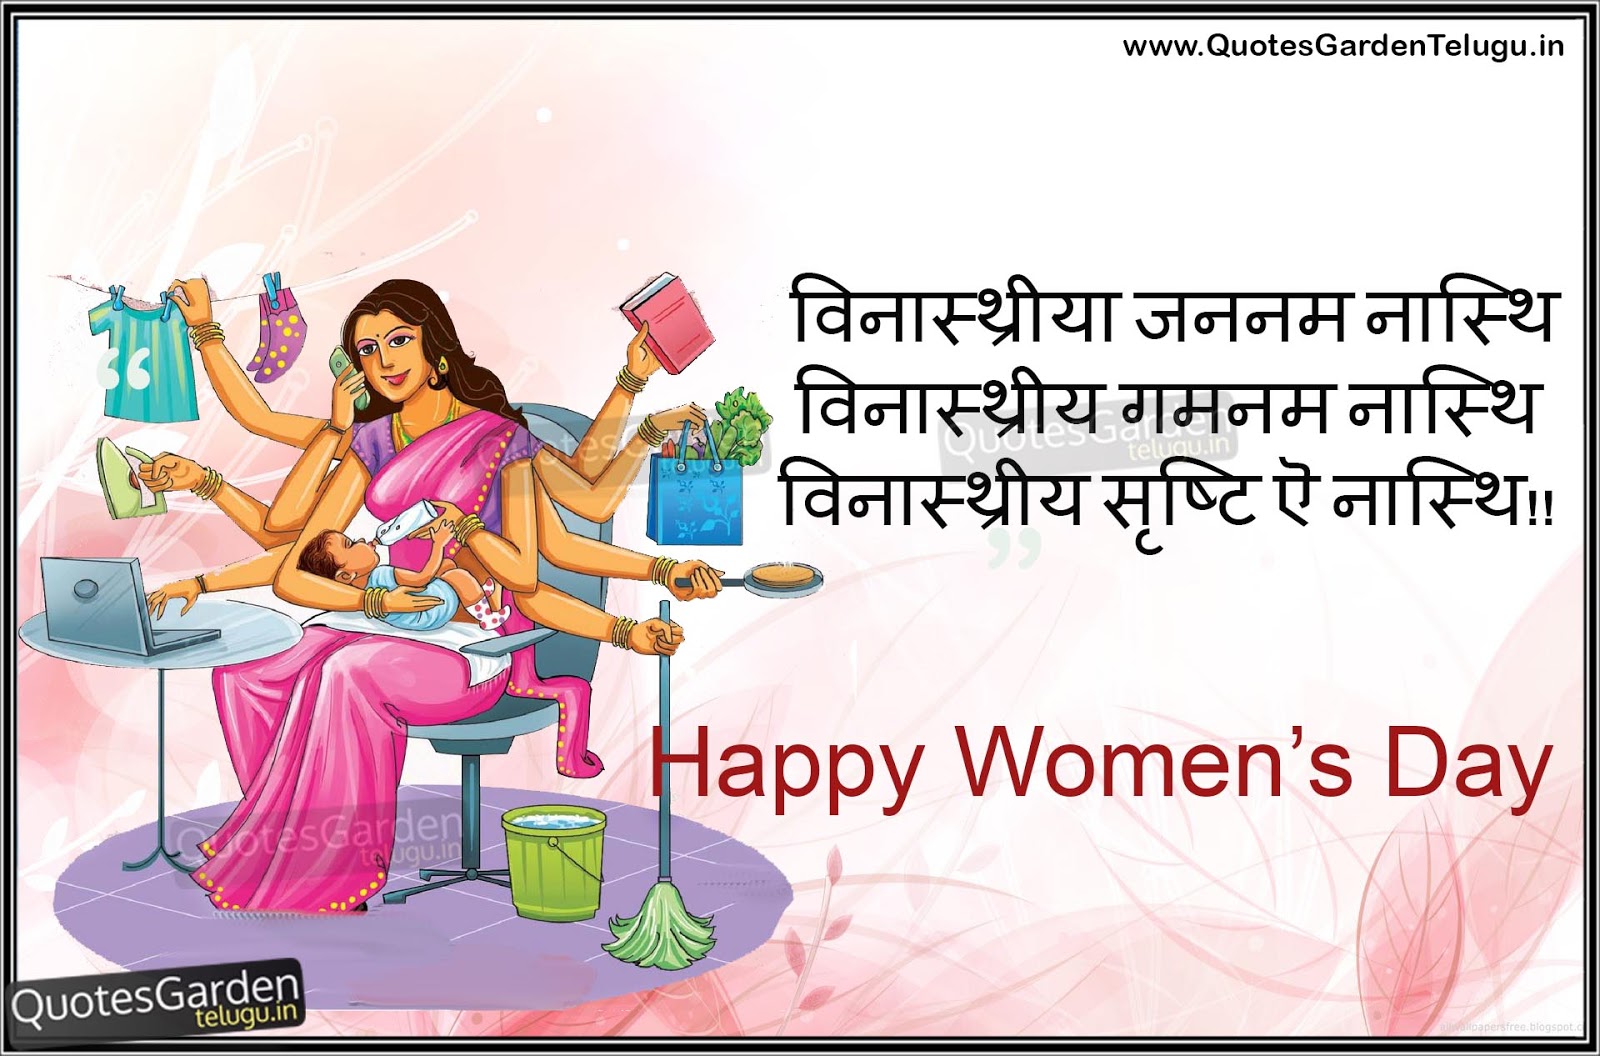 Women's Day Greetings Quotes in Hindi | QUOTES GARDEN TELUGU ...